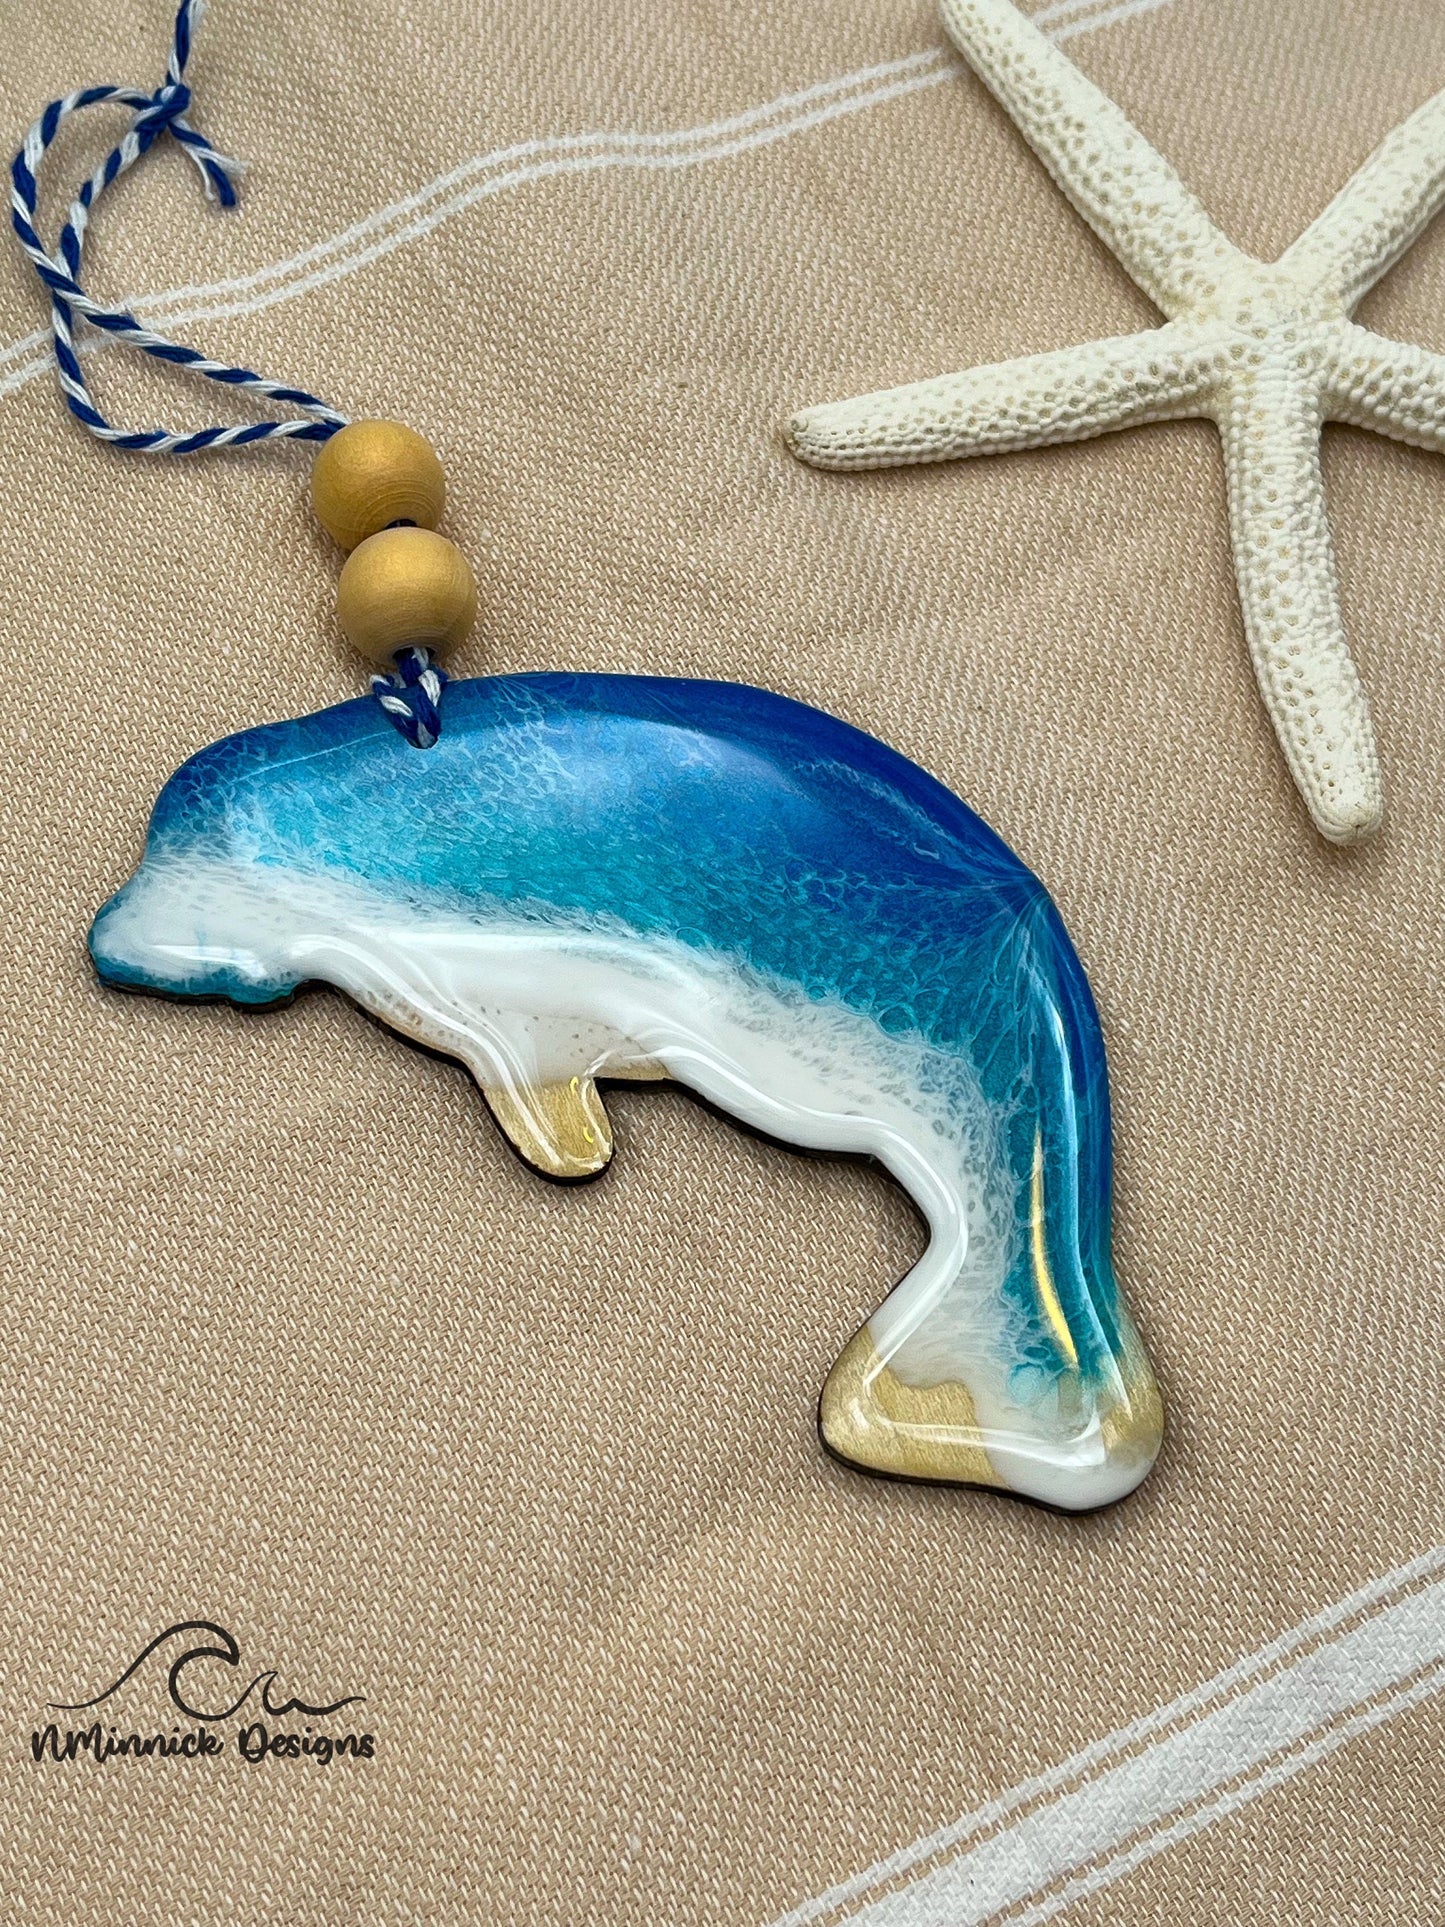 Manatee-shaped wooden Christmas ornament covered in blue and teal ocean resin art resembling the waves of the ocean. Finished with blue and white baker&#39;s twine and two wooden beads.